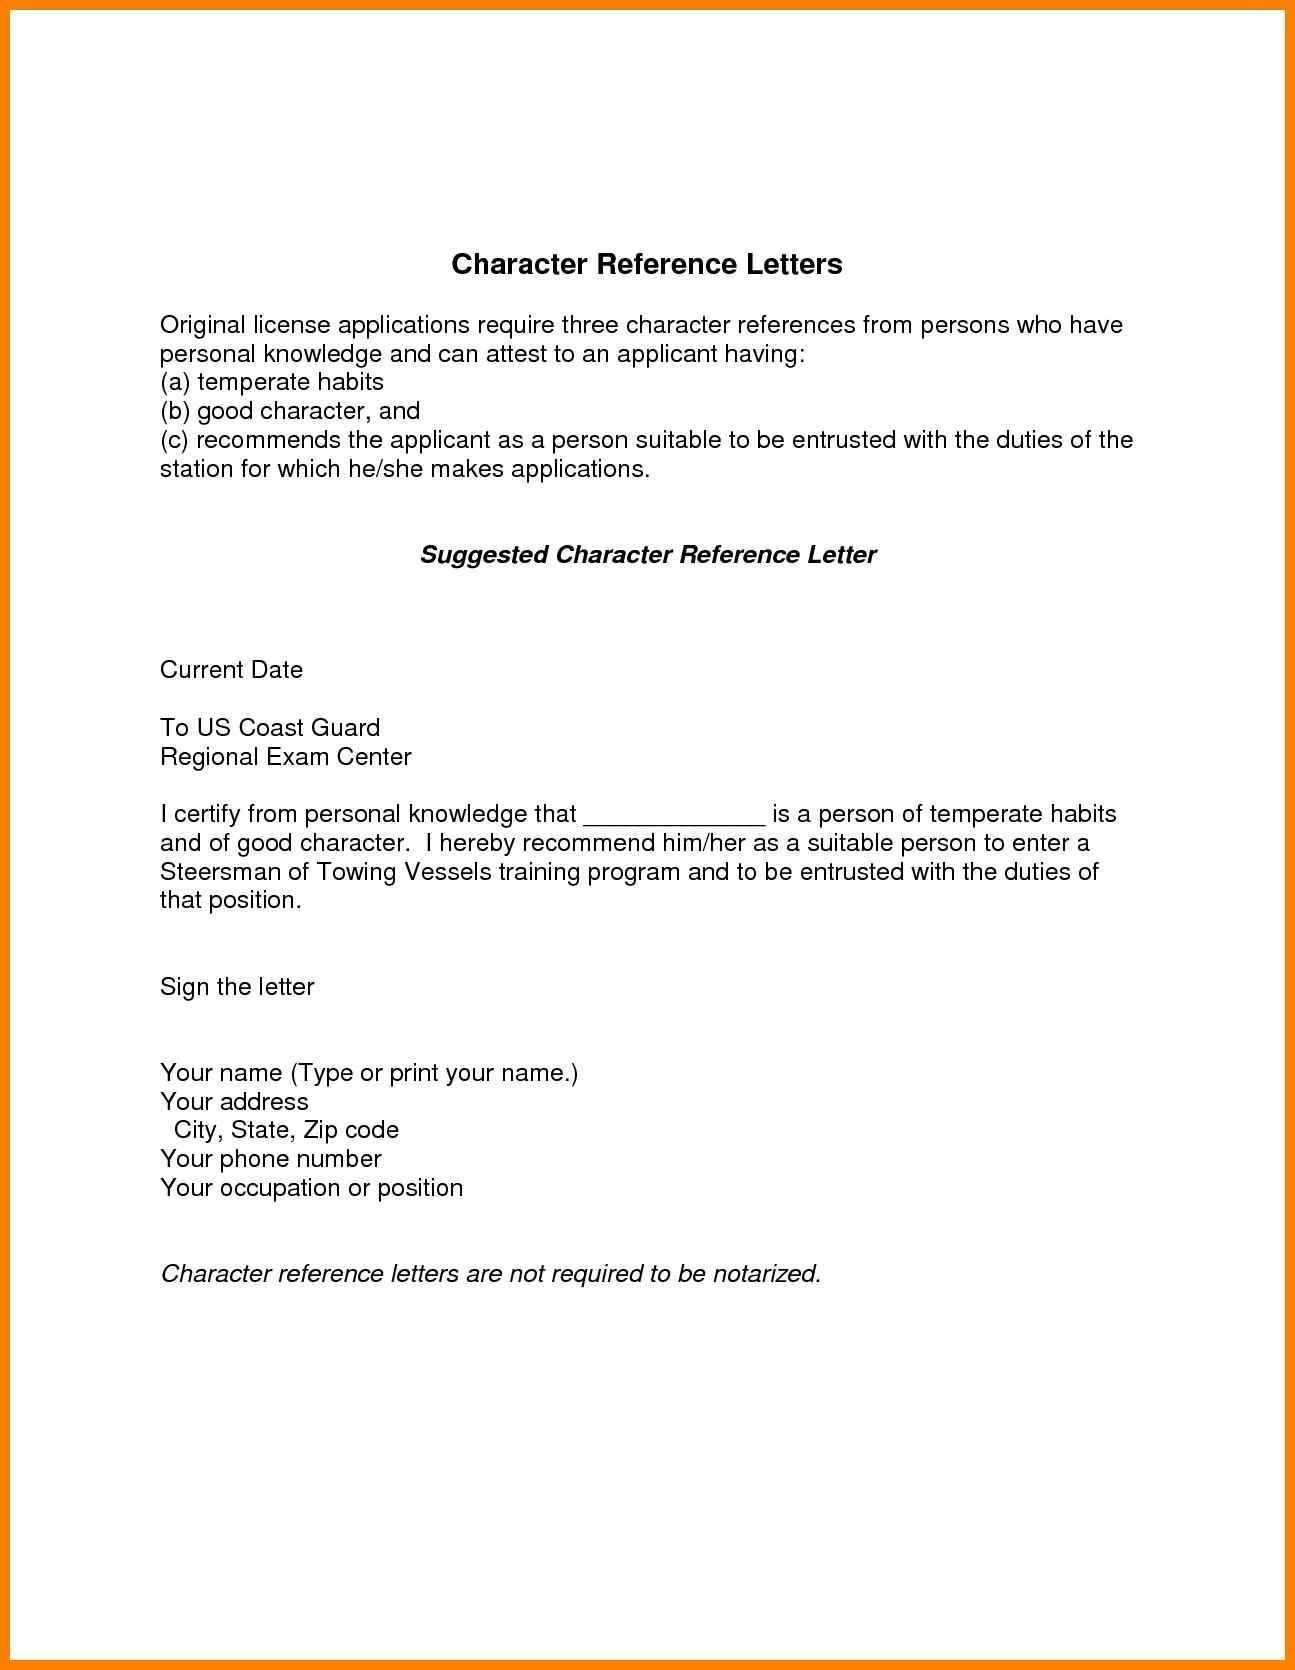 Character Reference Letter Template - Character Reference Letter Template Doc Fresh Sample Certificate